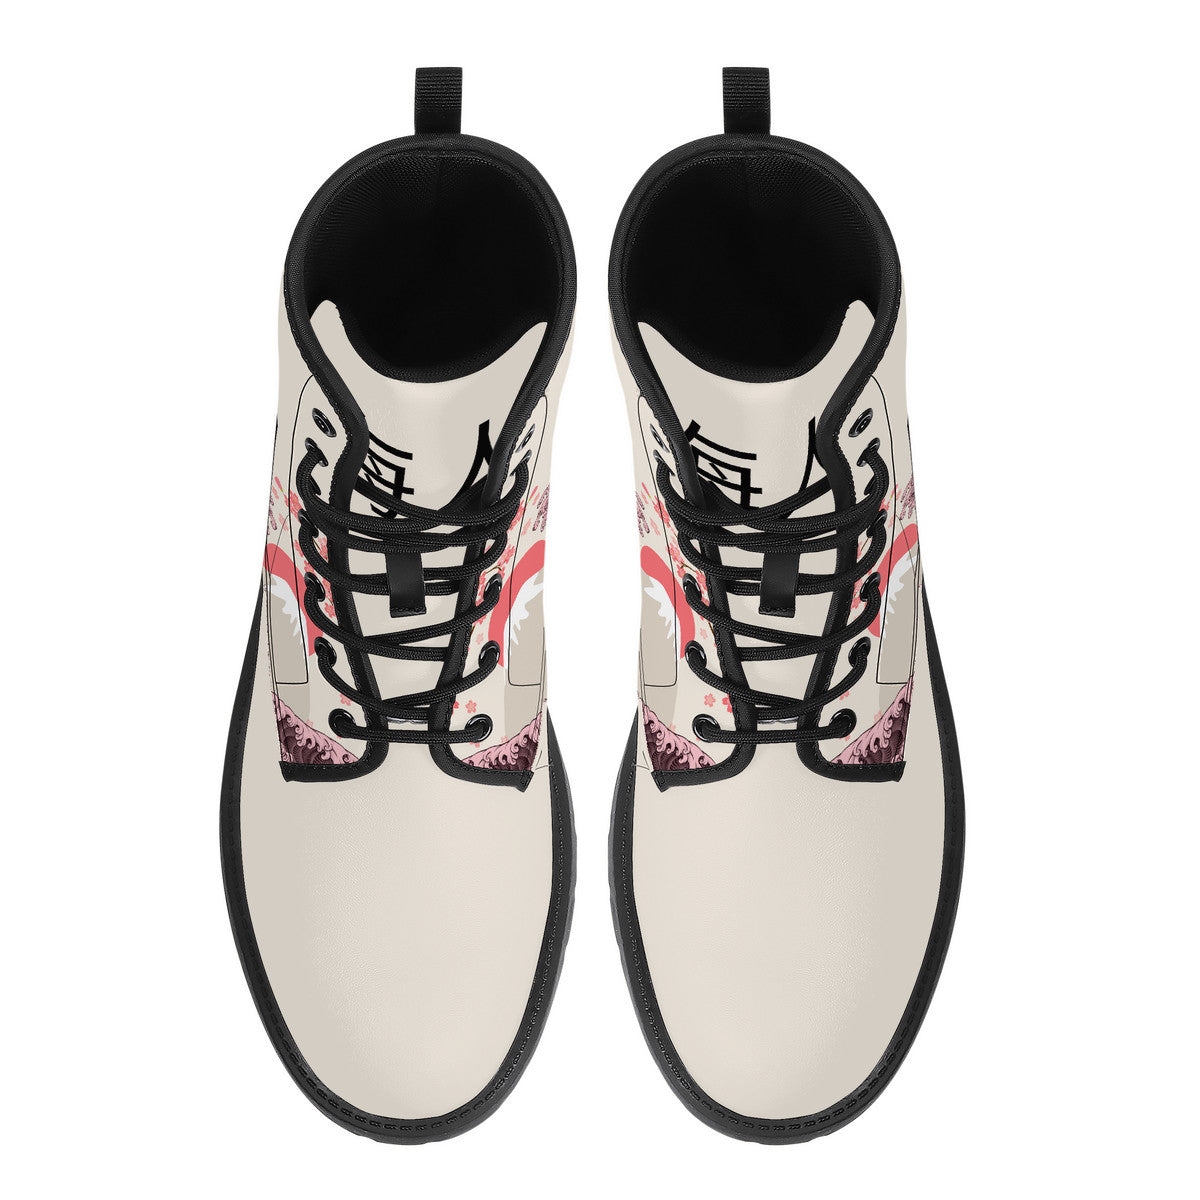 The Light Pink Great Wave Vegan Leather Boots